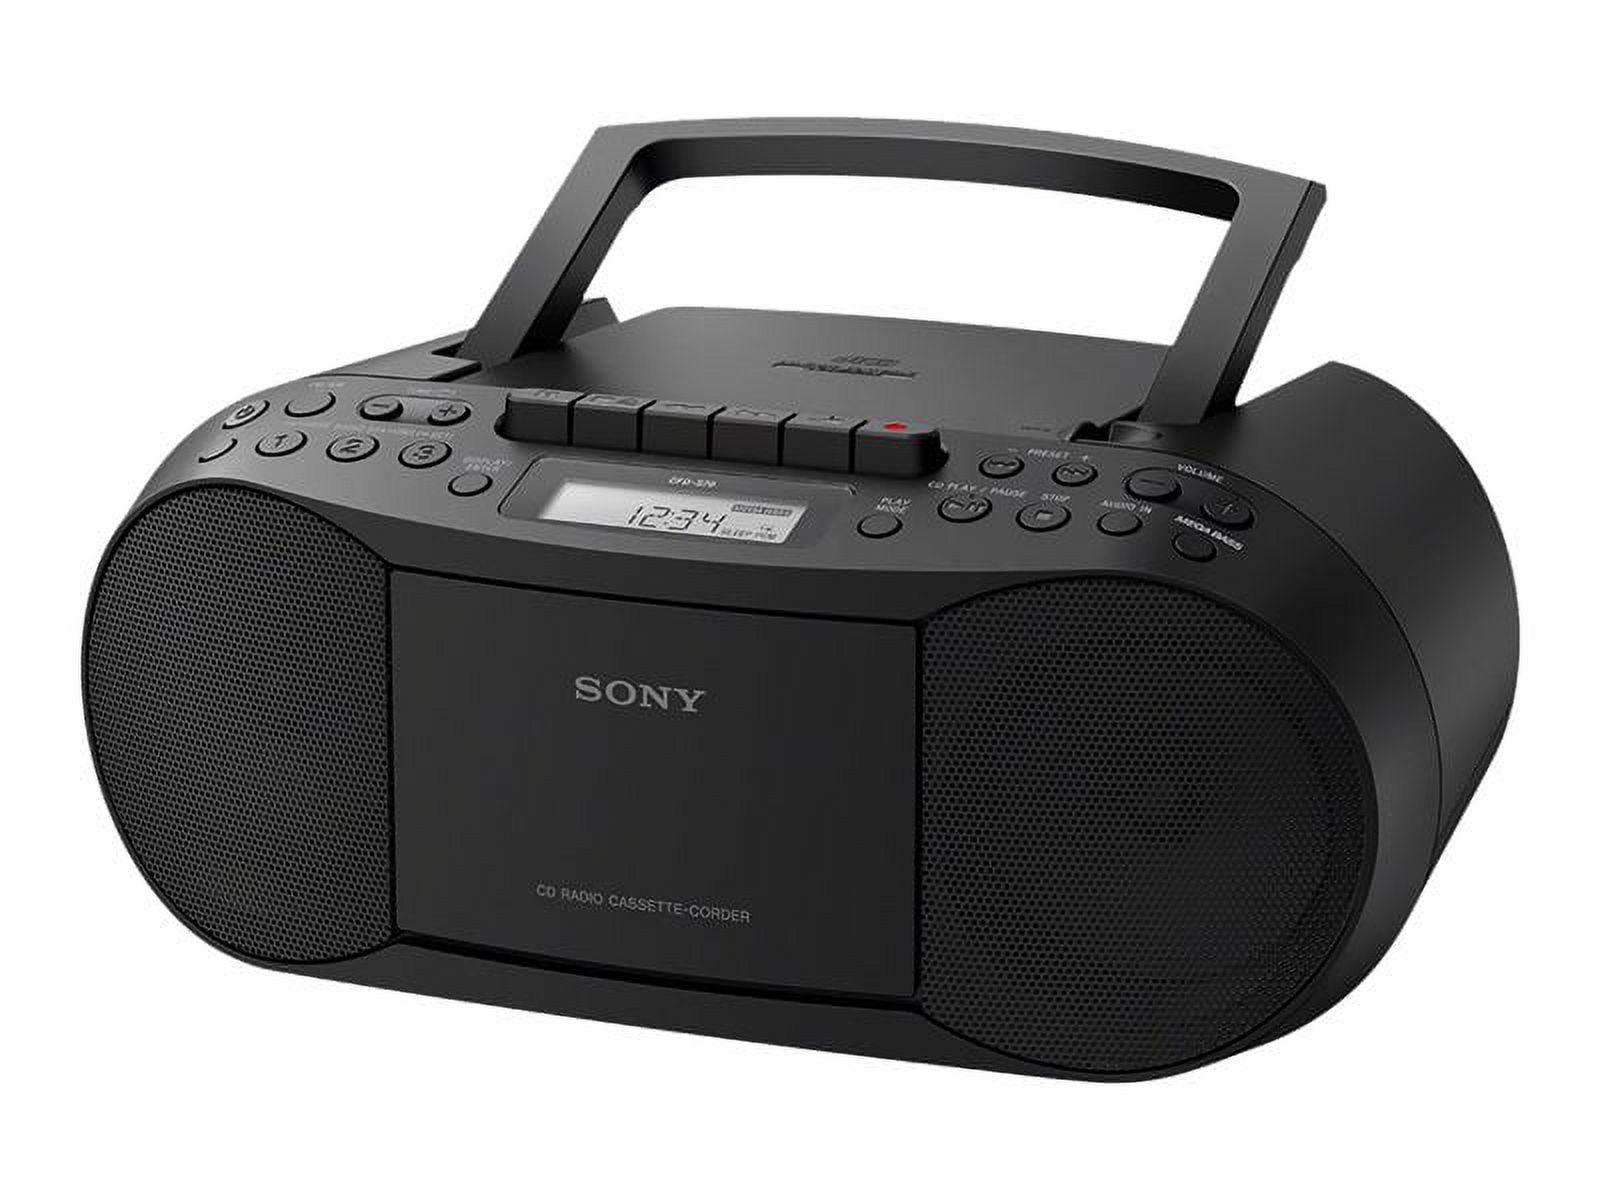 Sony CD/Cassette Boombox with Radio - 1 x Disc - 3.40 W Integrated Stereo Speaker - Black LCD - CD-DA, MP3 - 1.60 MHz AM - 108 MHz FM - 1.60 MHz MW - Auxiliary Input - image 3 of 5